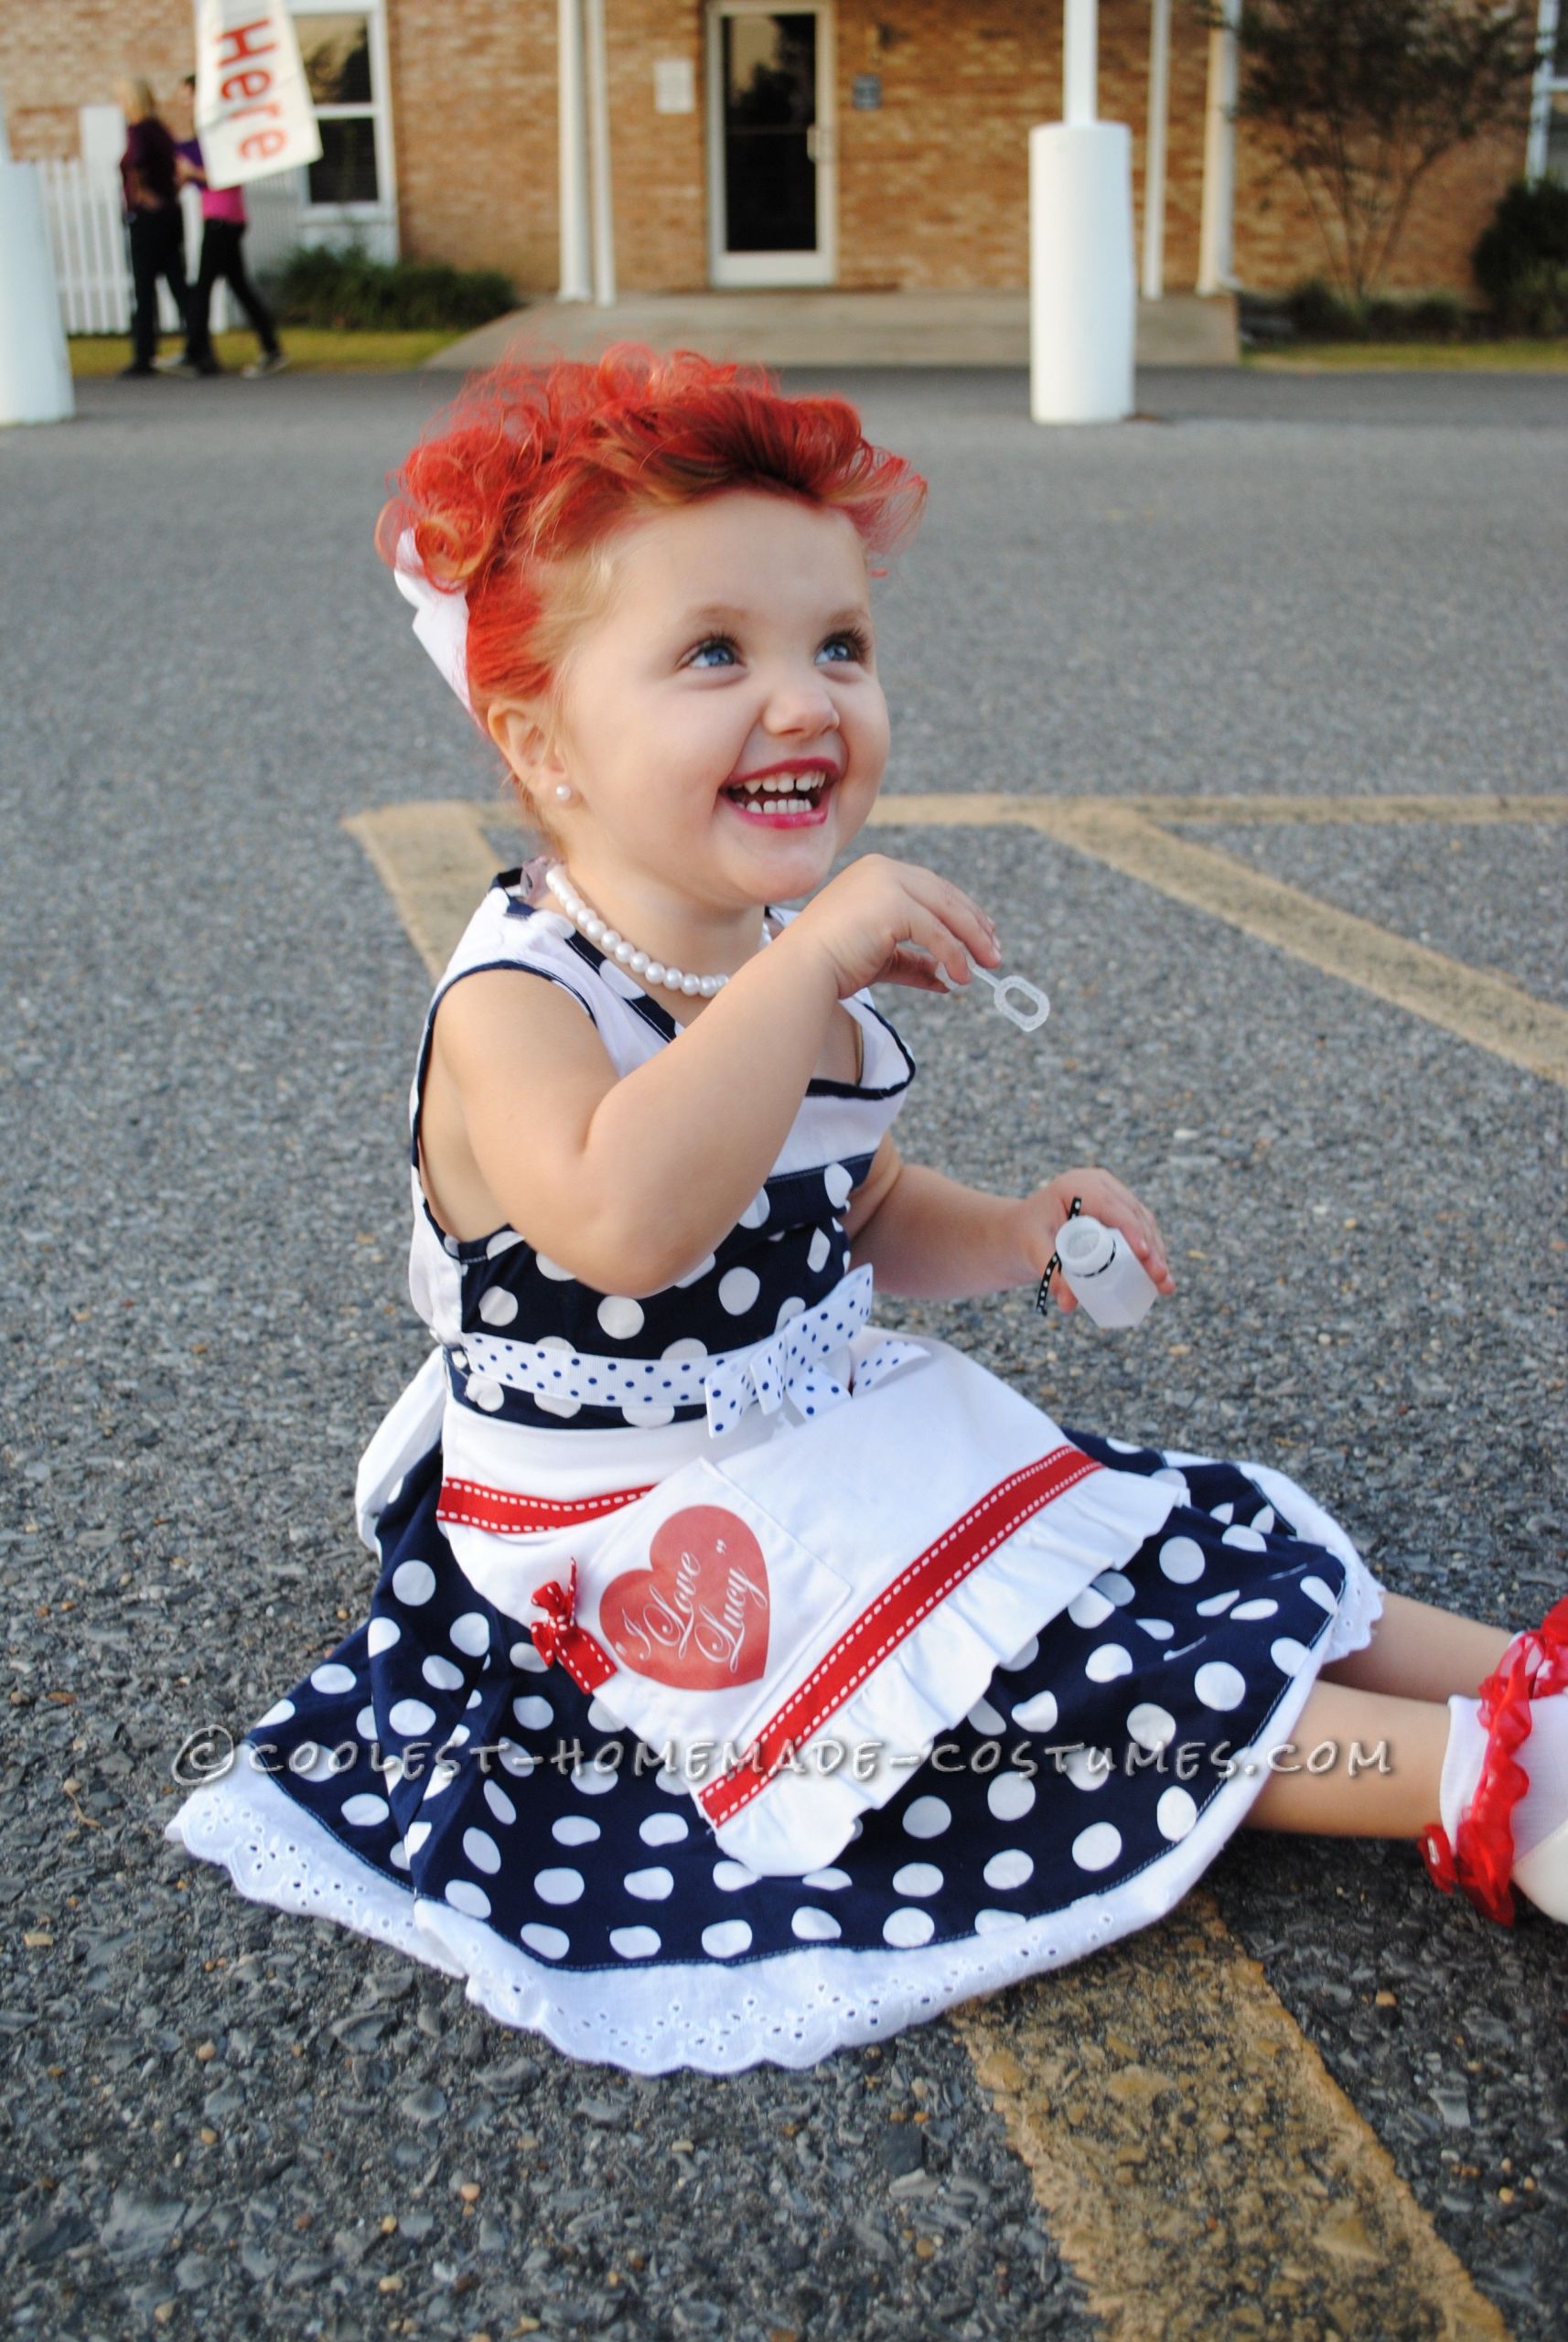 DIY Baby Halloween Costume
 Adorable “I Love Lucy” Homemade Costume for a Toddler